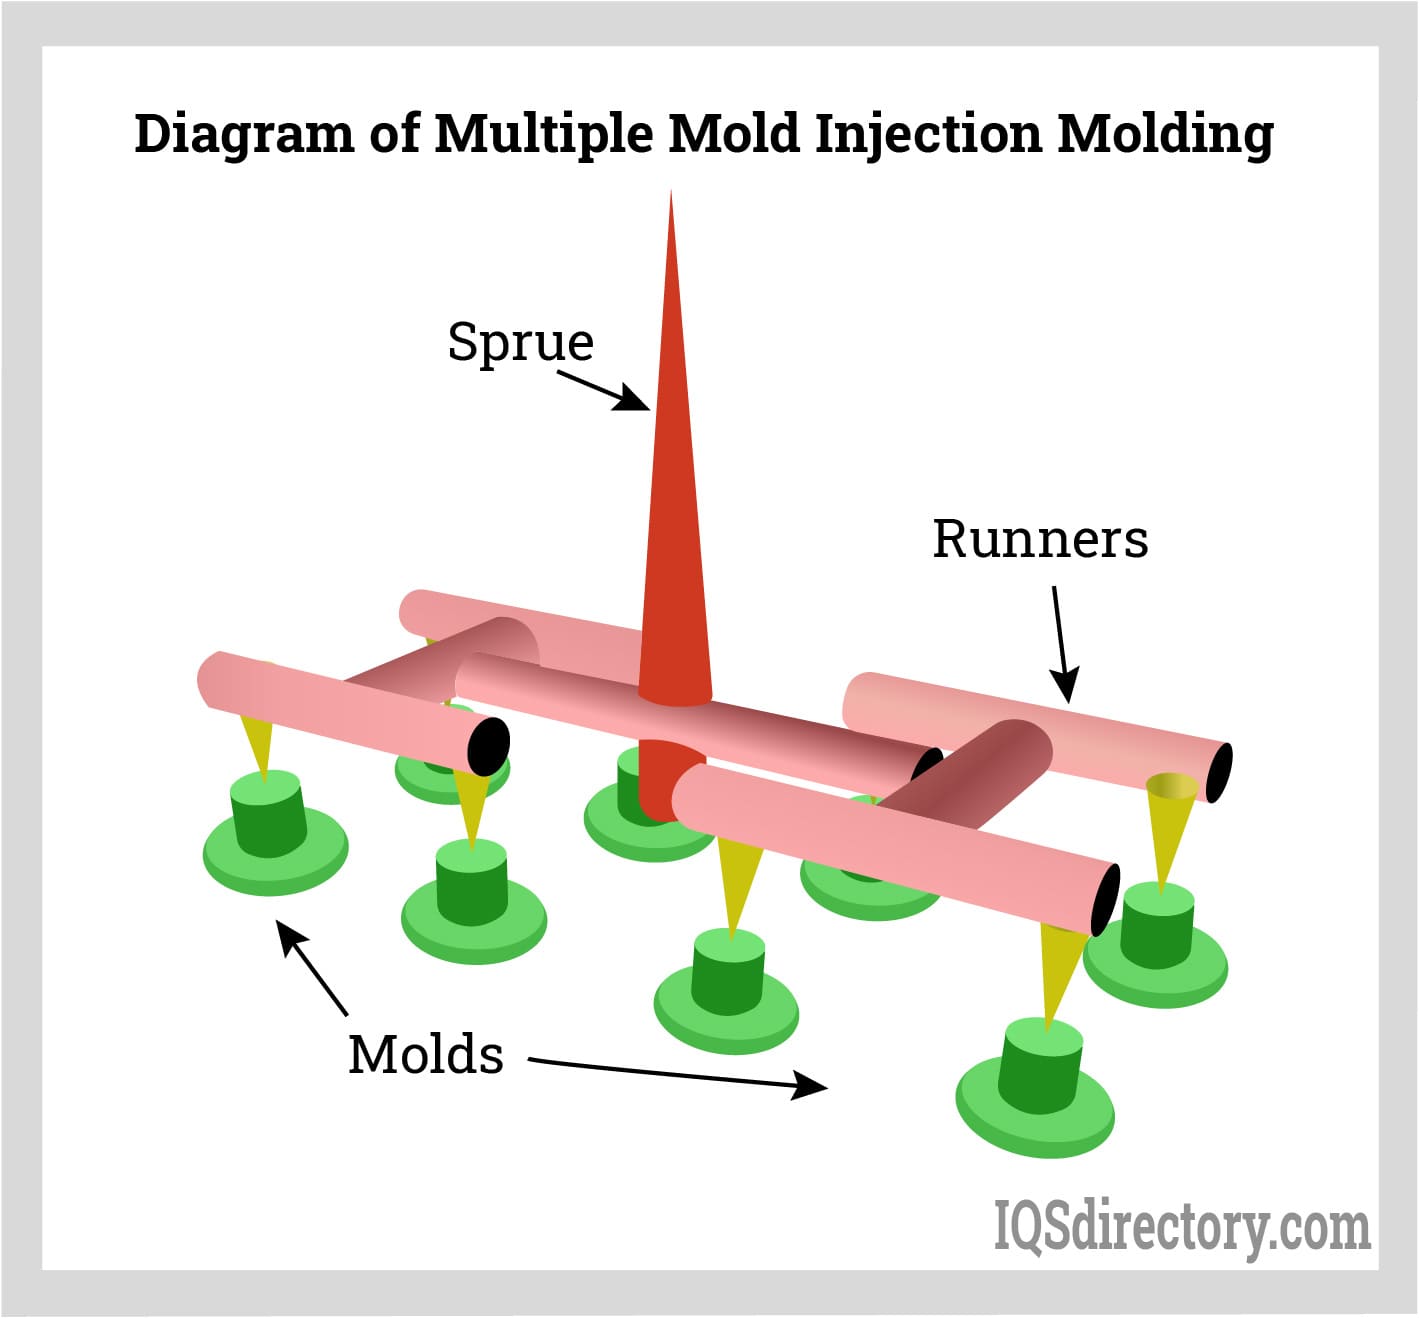 Diagram of Multiple Mold Injection Molding